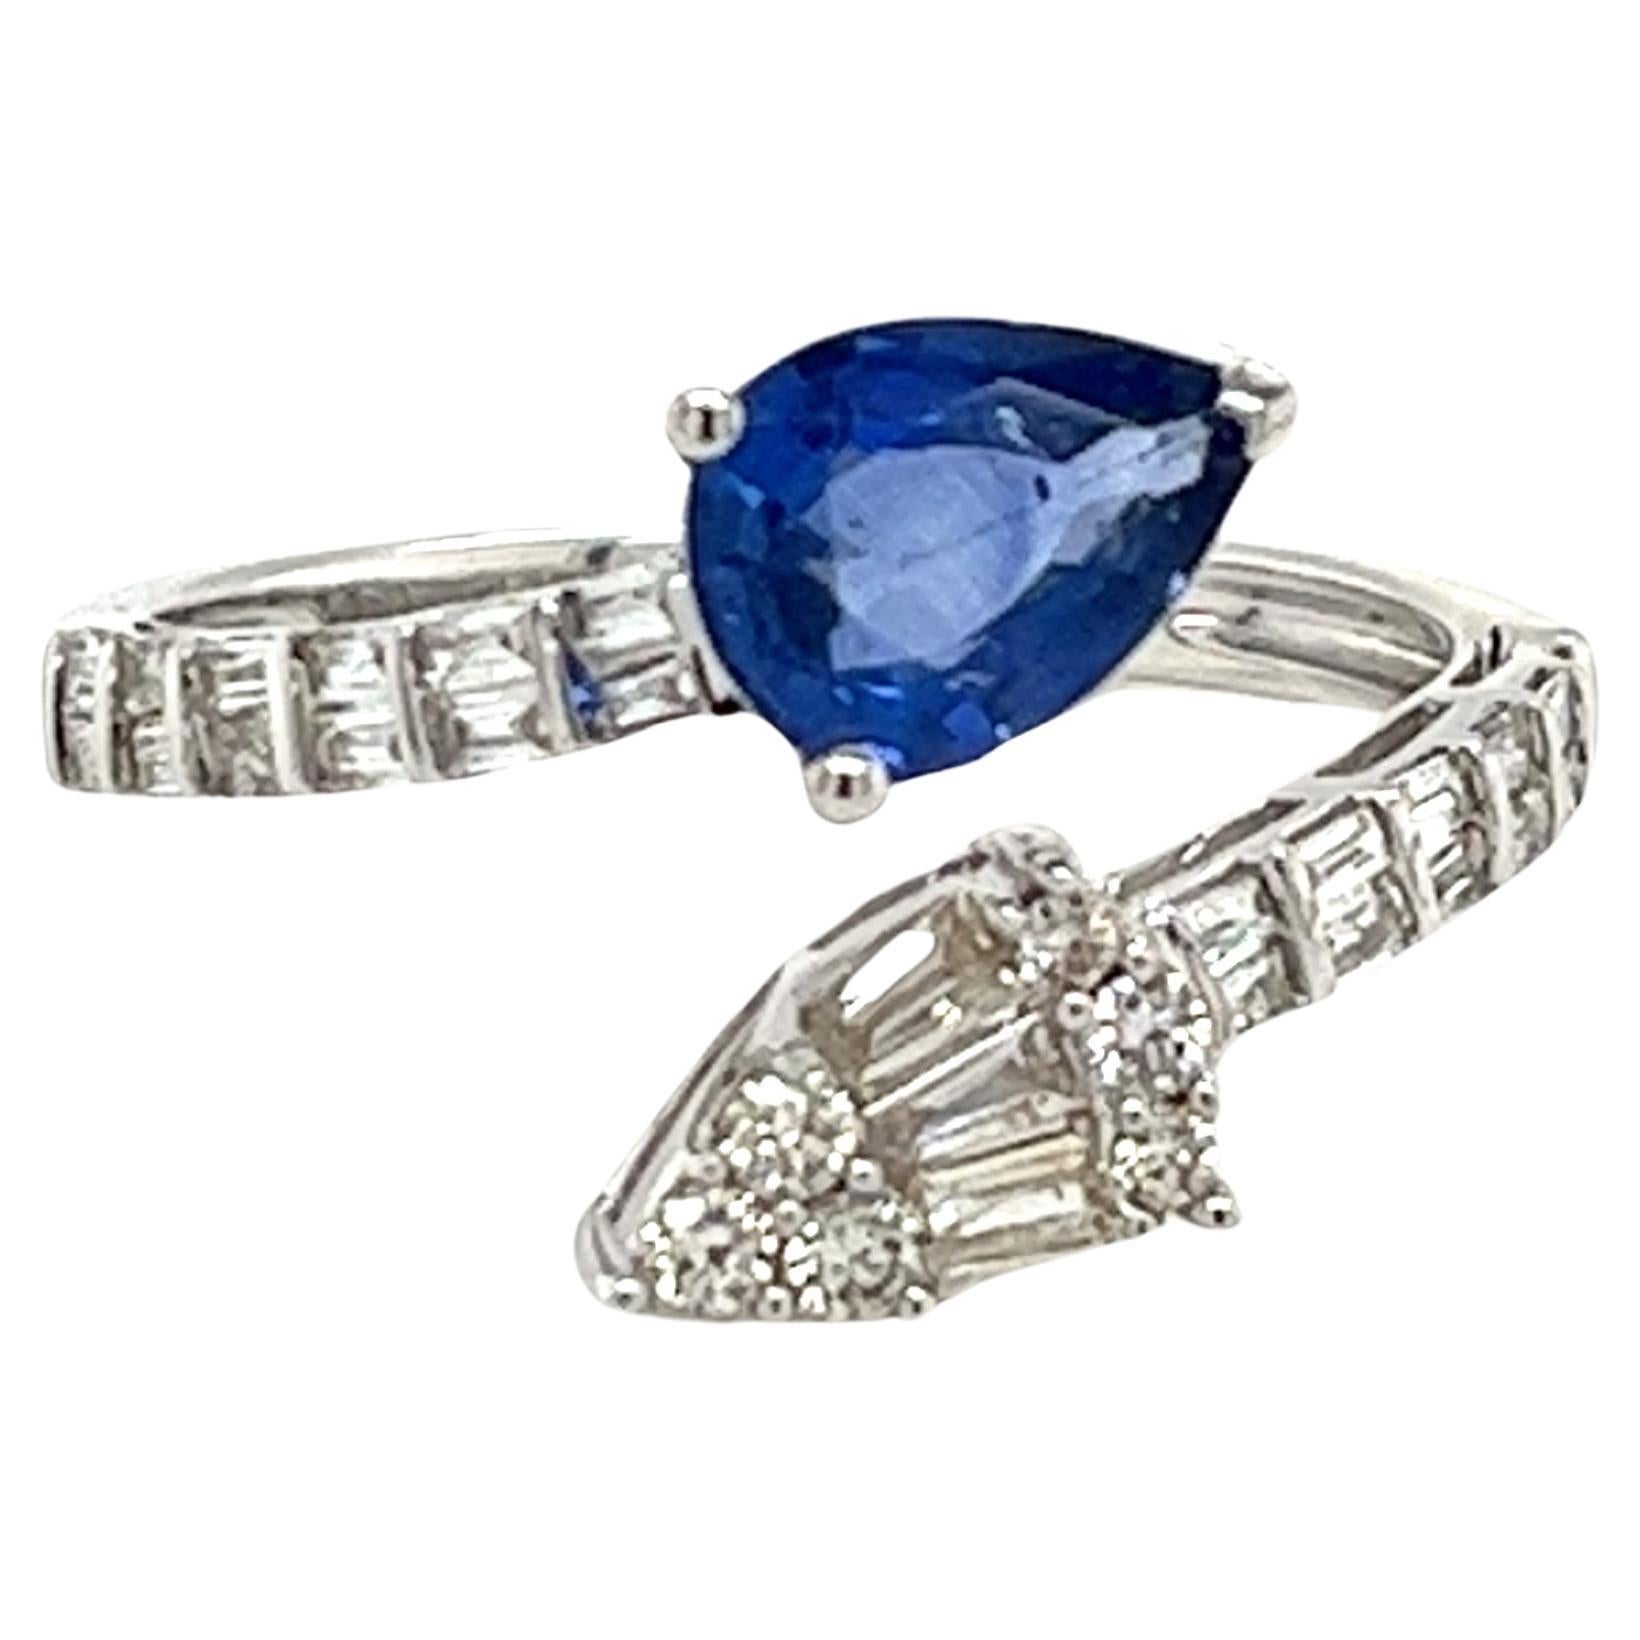 Ring 18Kt White Gold, Diamonds 0.38 cts & sapphire 1.09 cts. For Sale